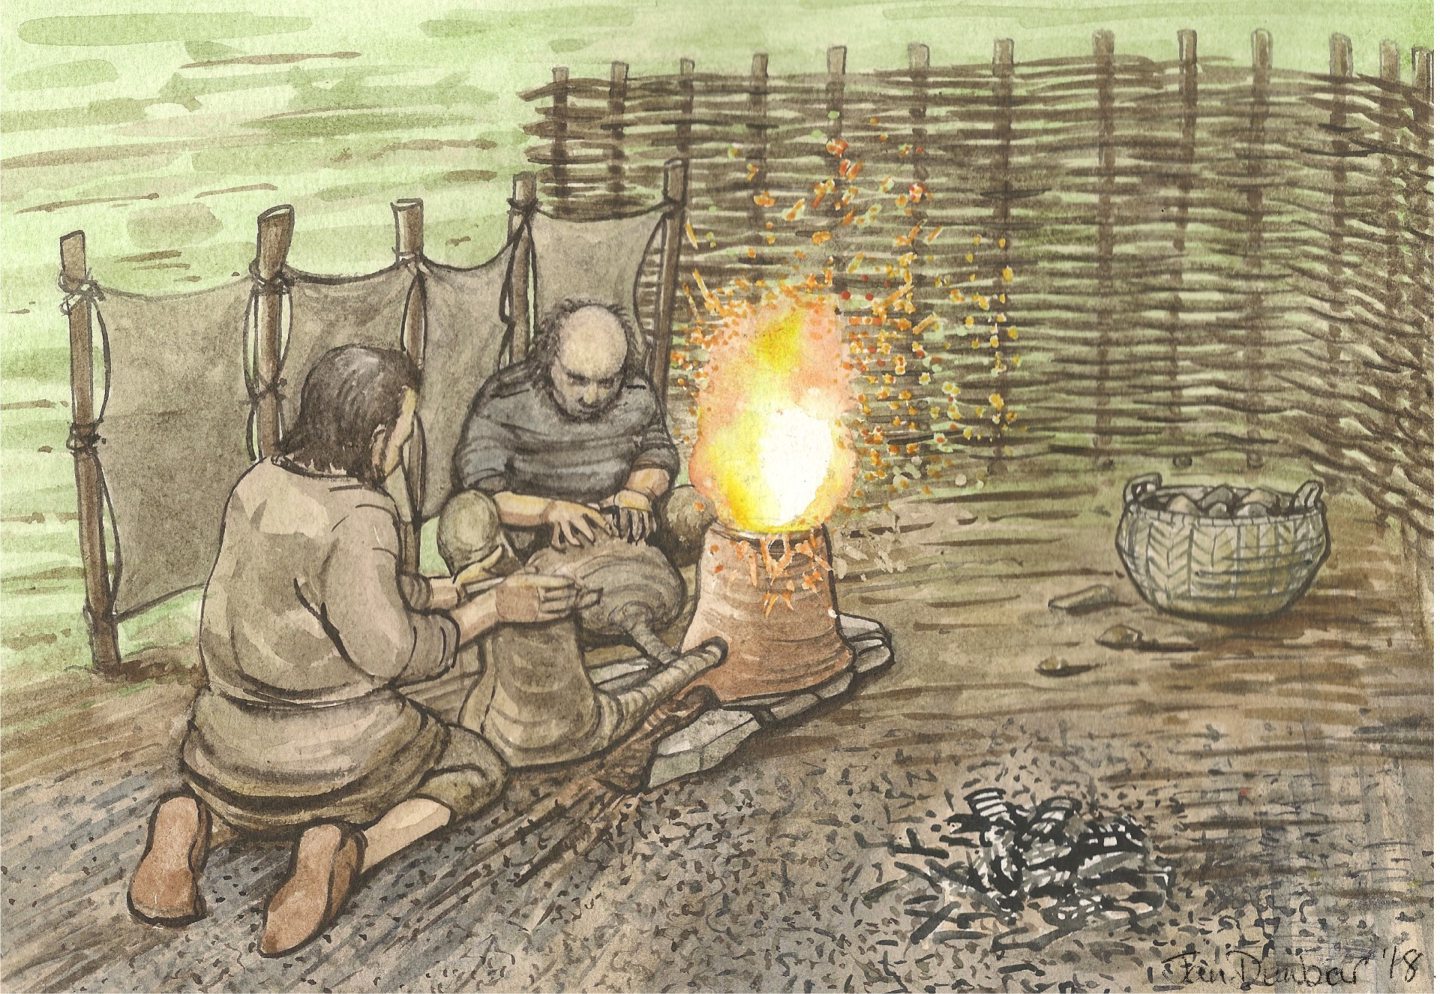 Illustration by artist Jan Dunbar of monks working around the hearth at Deer Monastery.